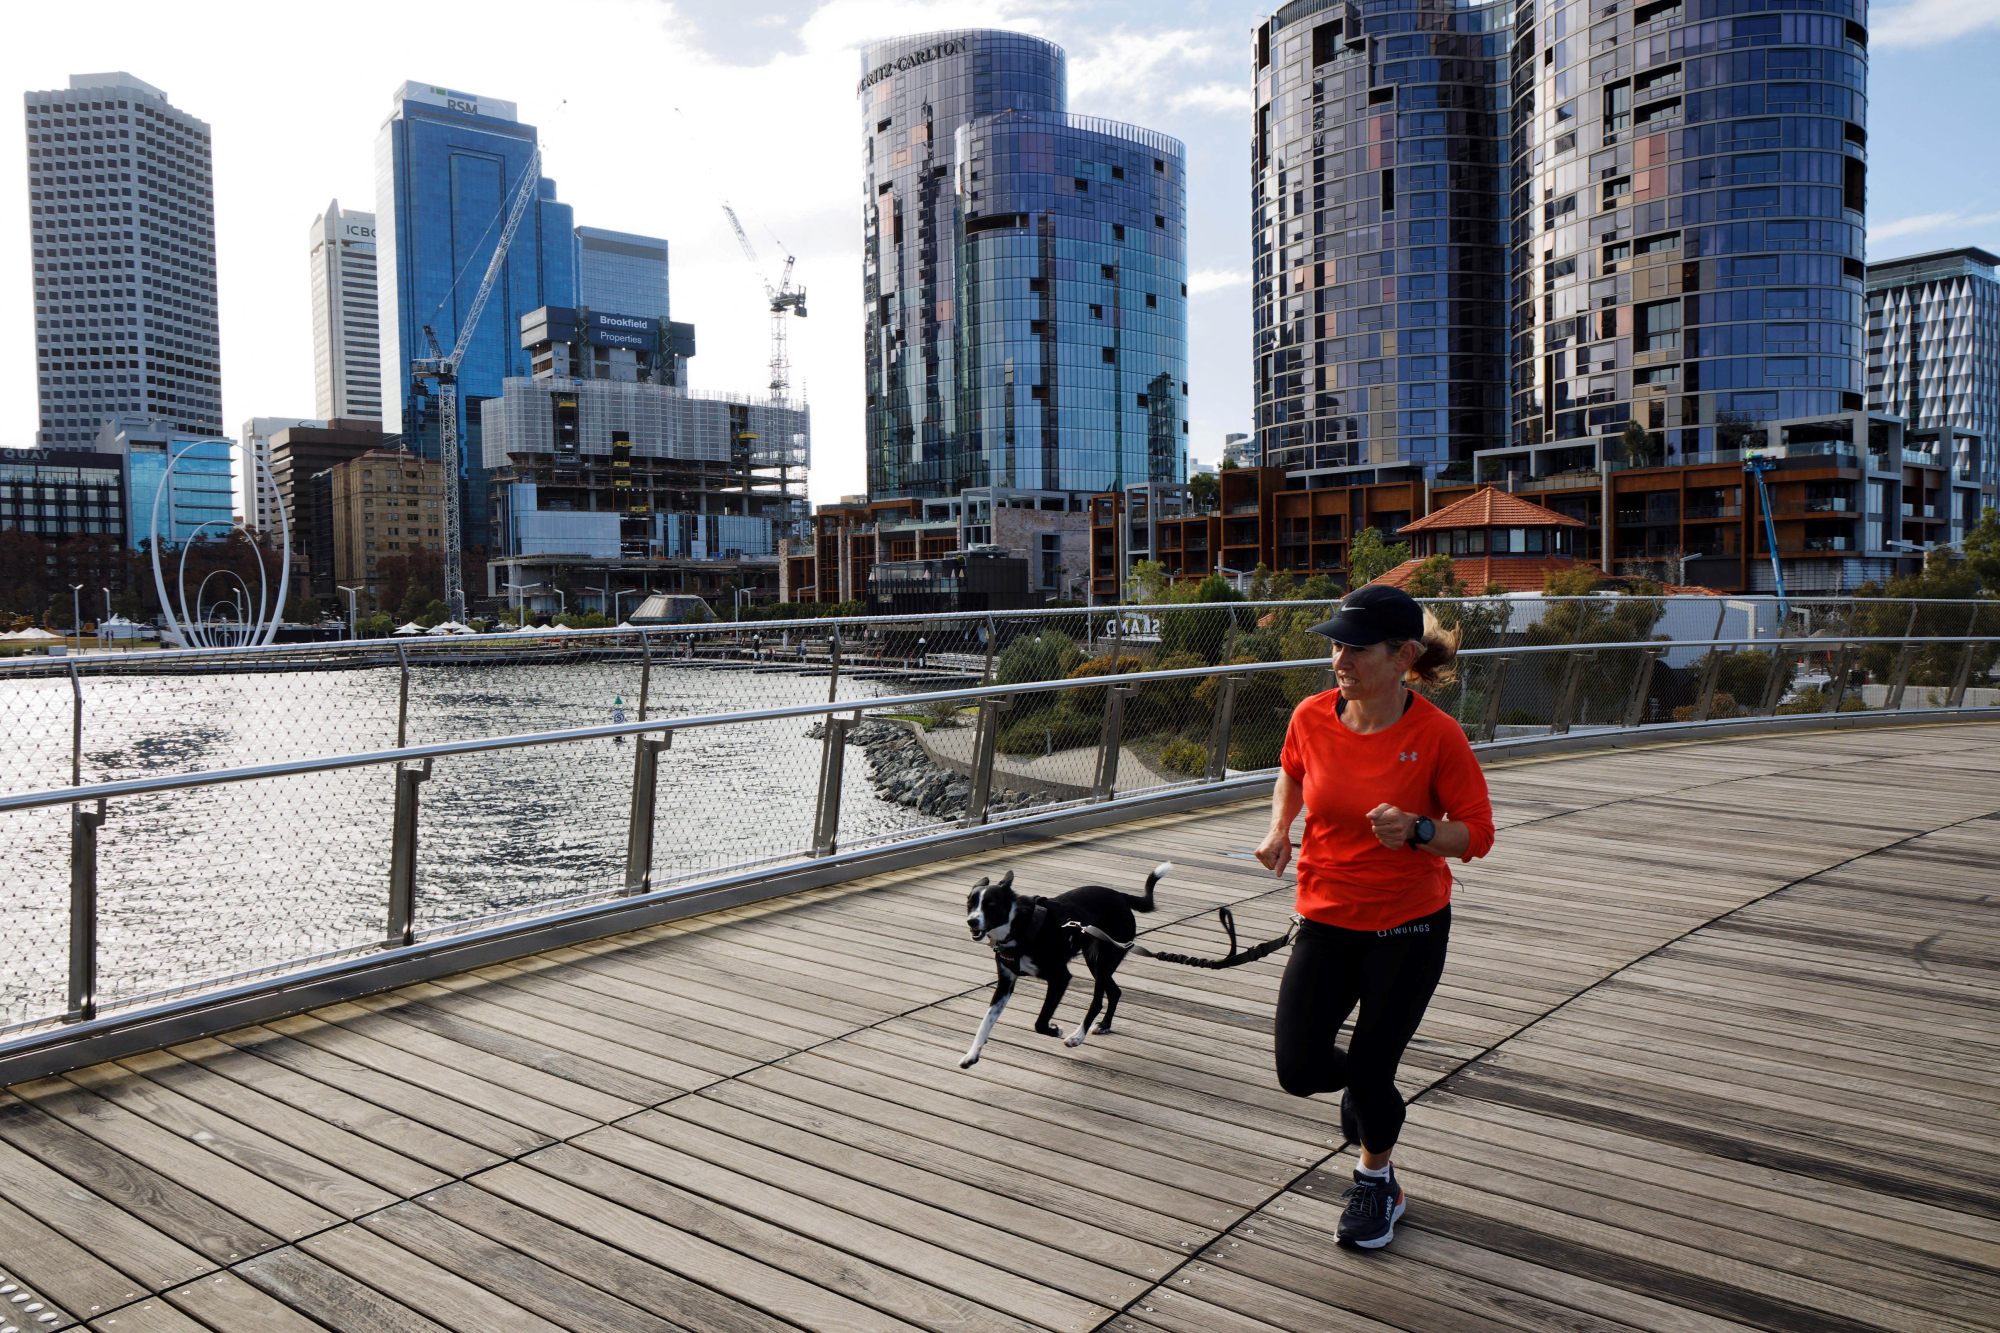 A woman jogs in Perth, Western Australia, on June 29, 2021, as several positive Covid-19 coronavirus cases led to a four-day lockdown of the metropolitan area. Photo: AFP